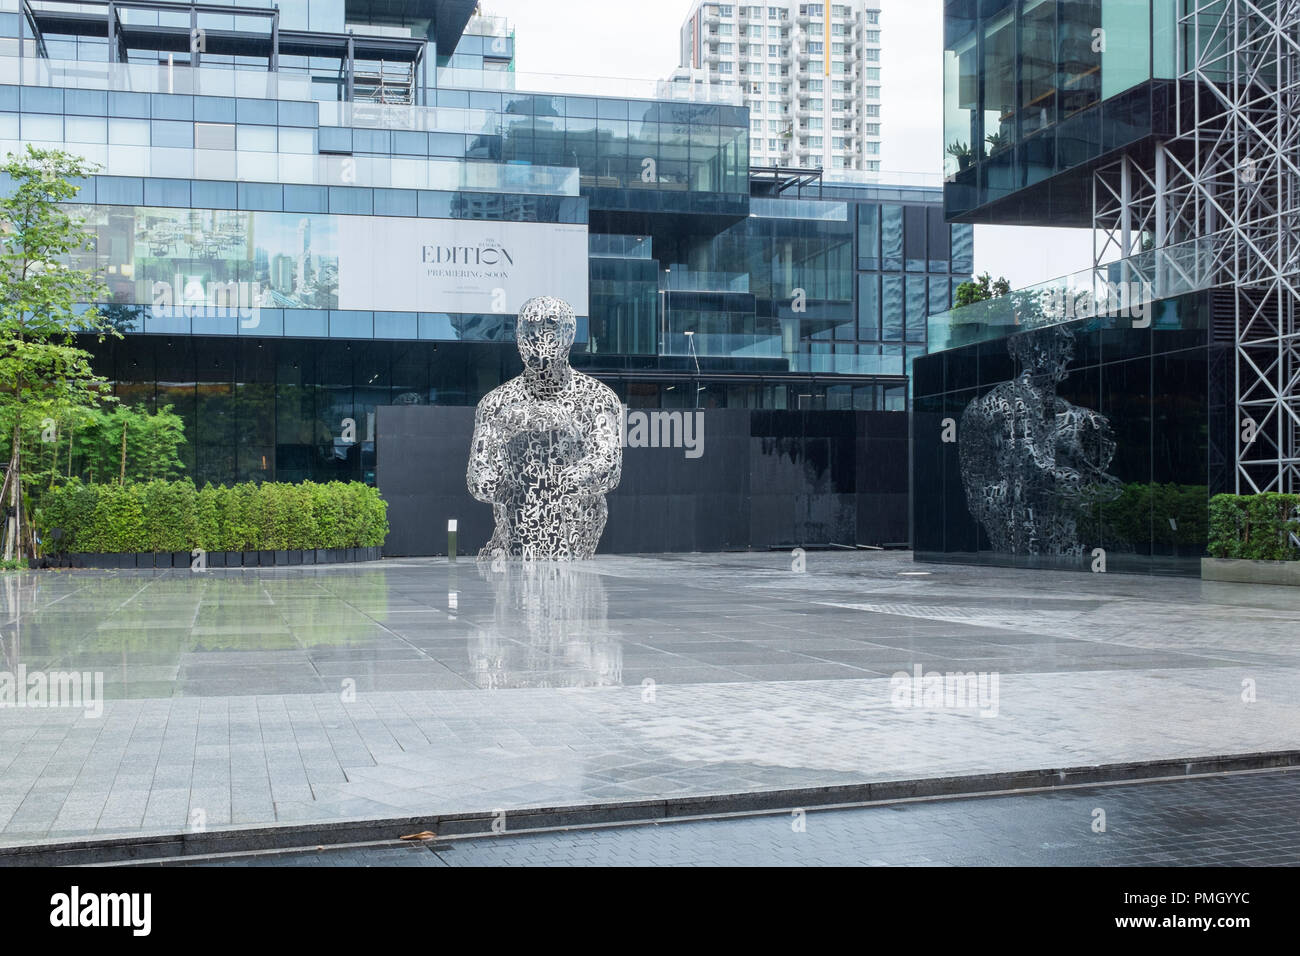 Unusual etched steel sculpture outside the Edition Hotel in Bangkok, Thailand Stock Photo